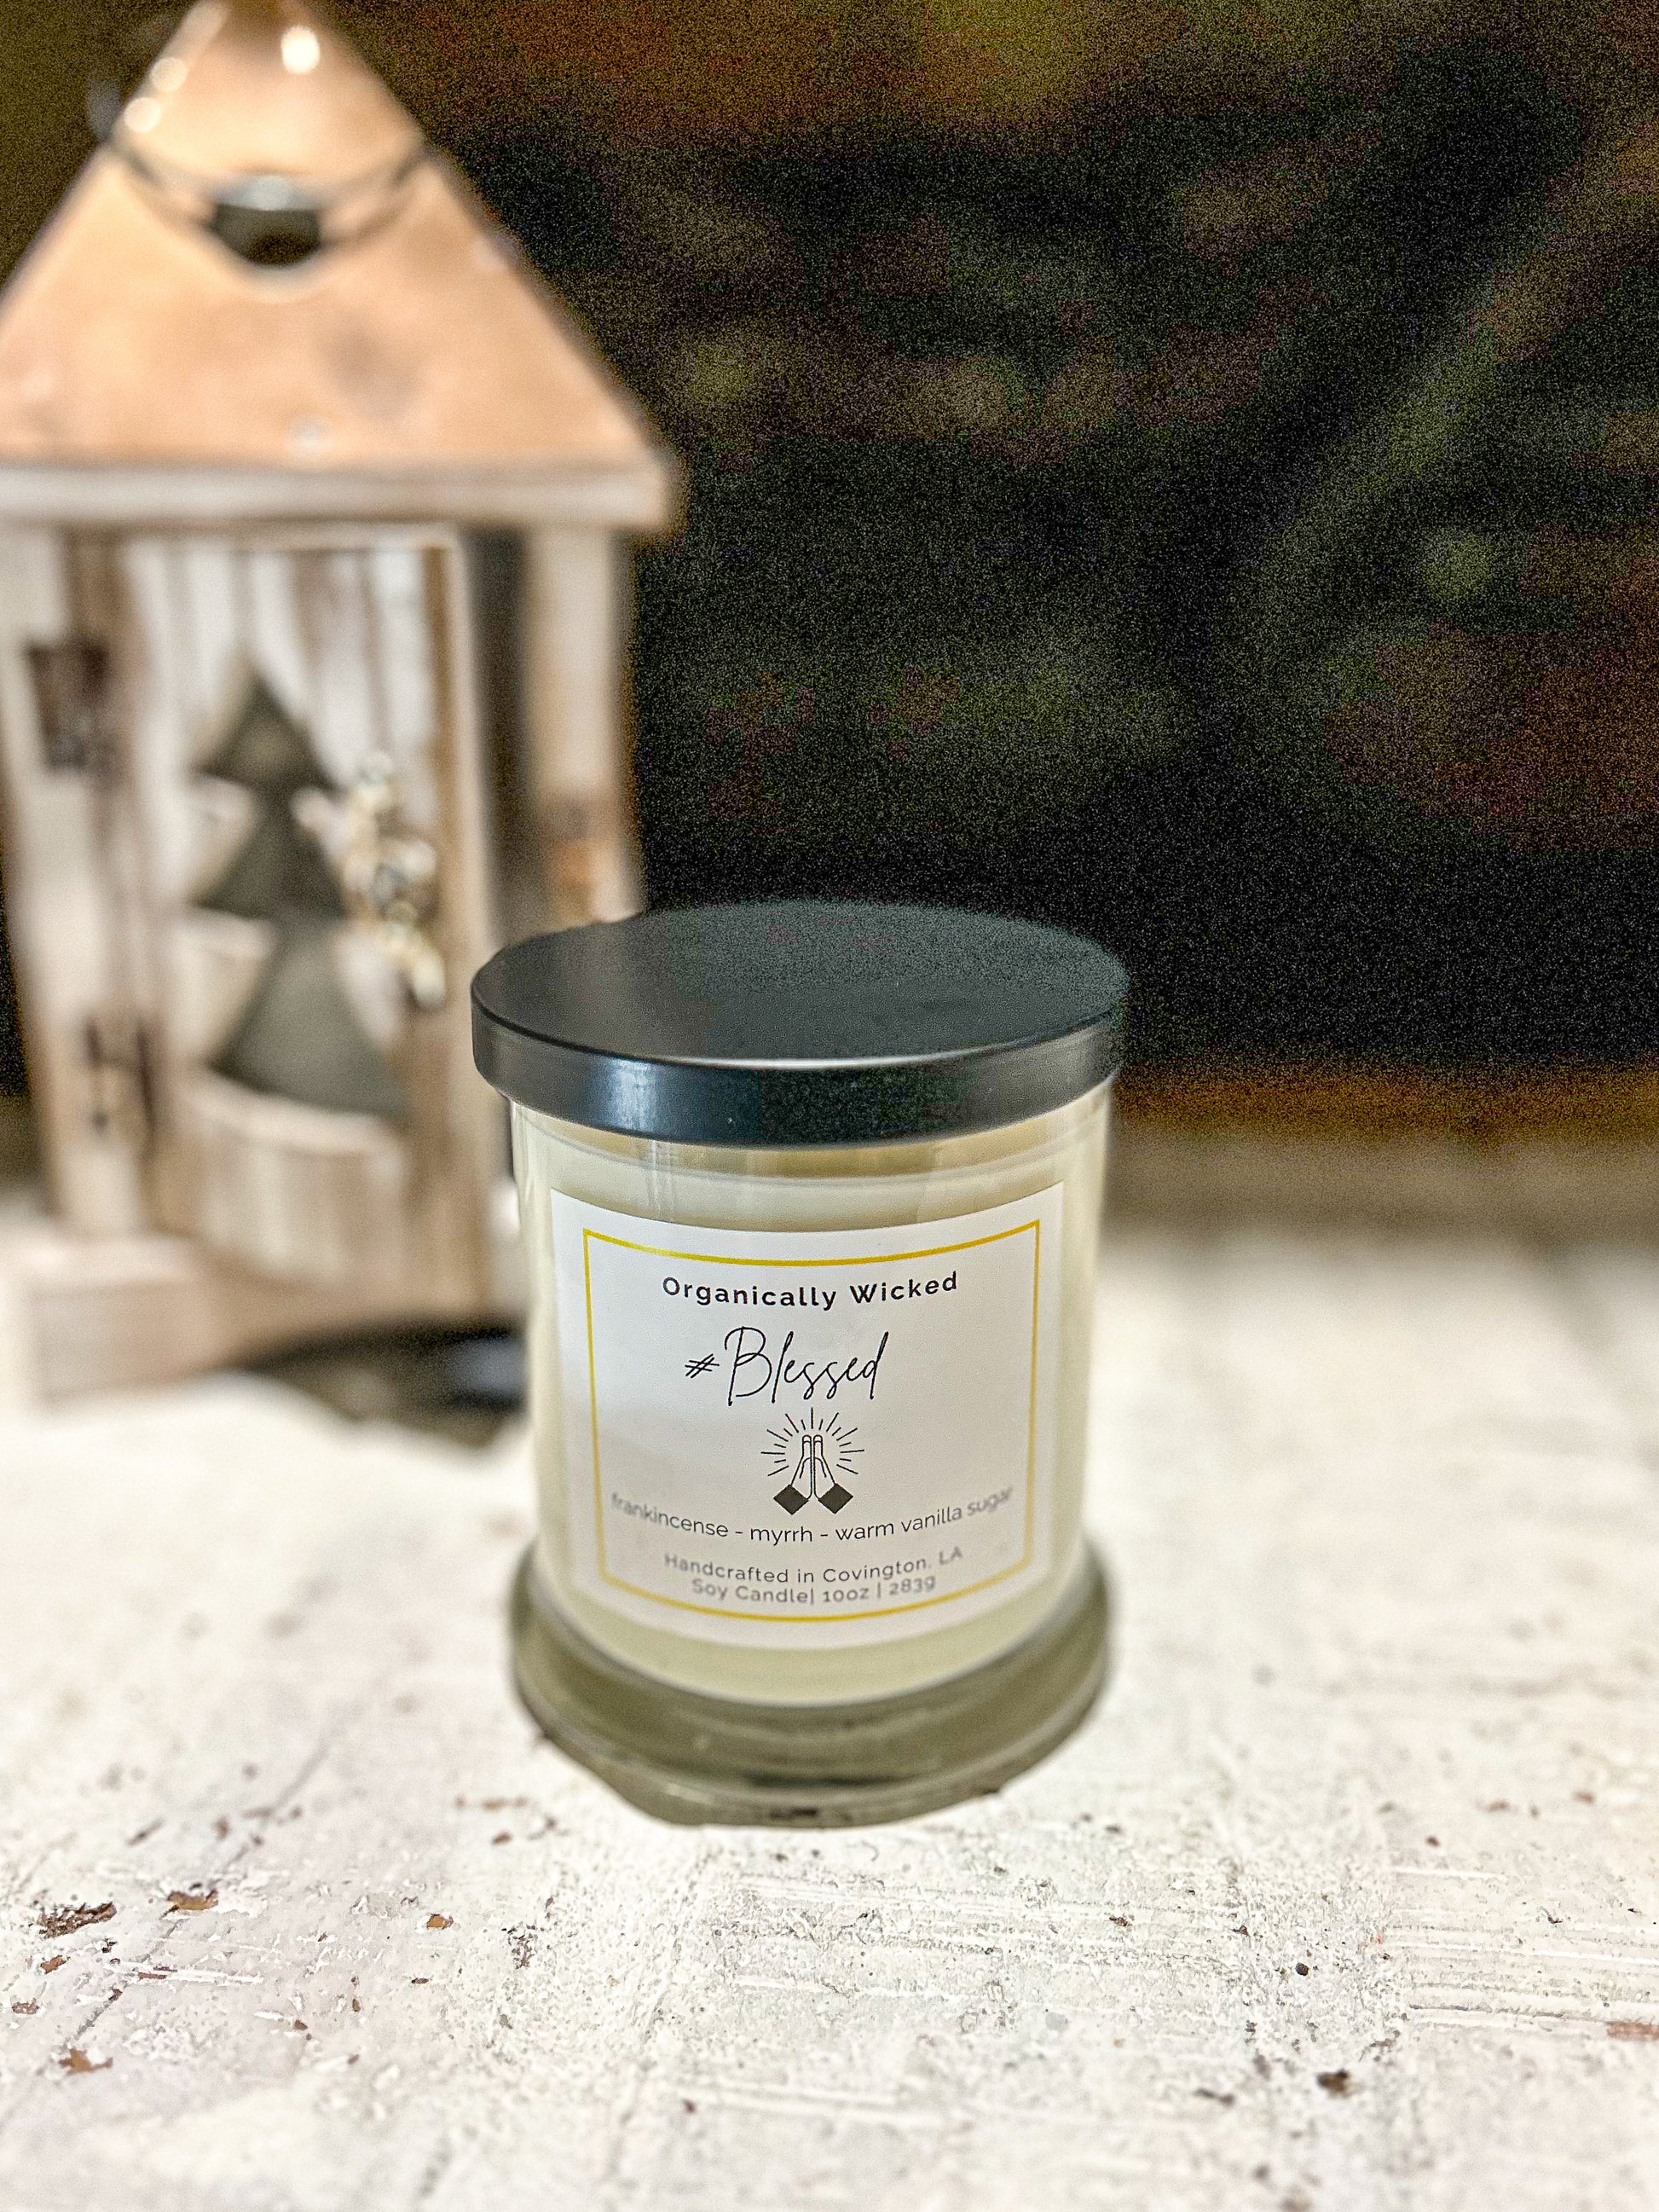 No. 007 The King's Gift candle - Frankincense & Myrrh